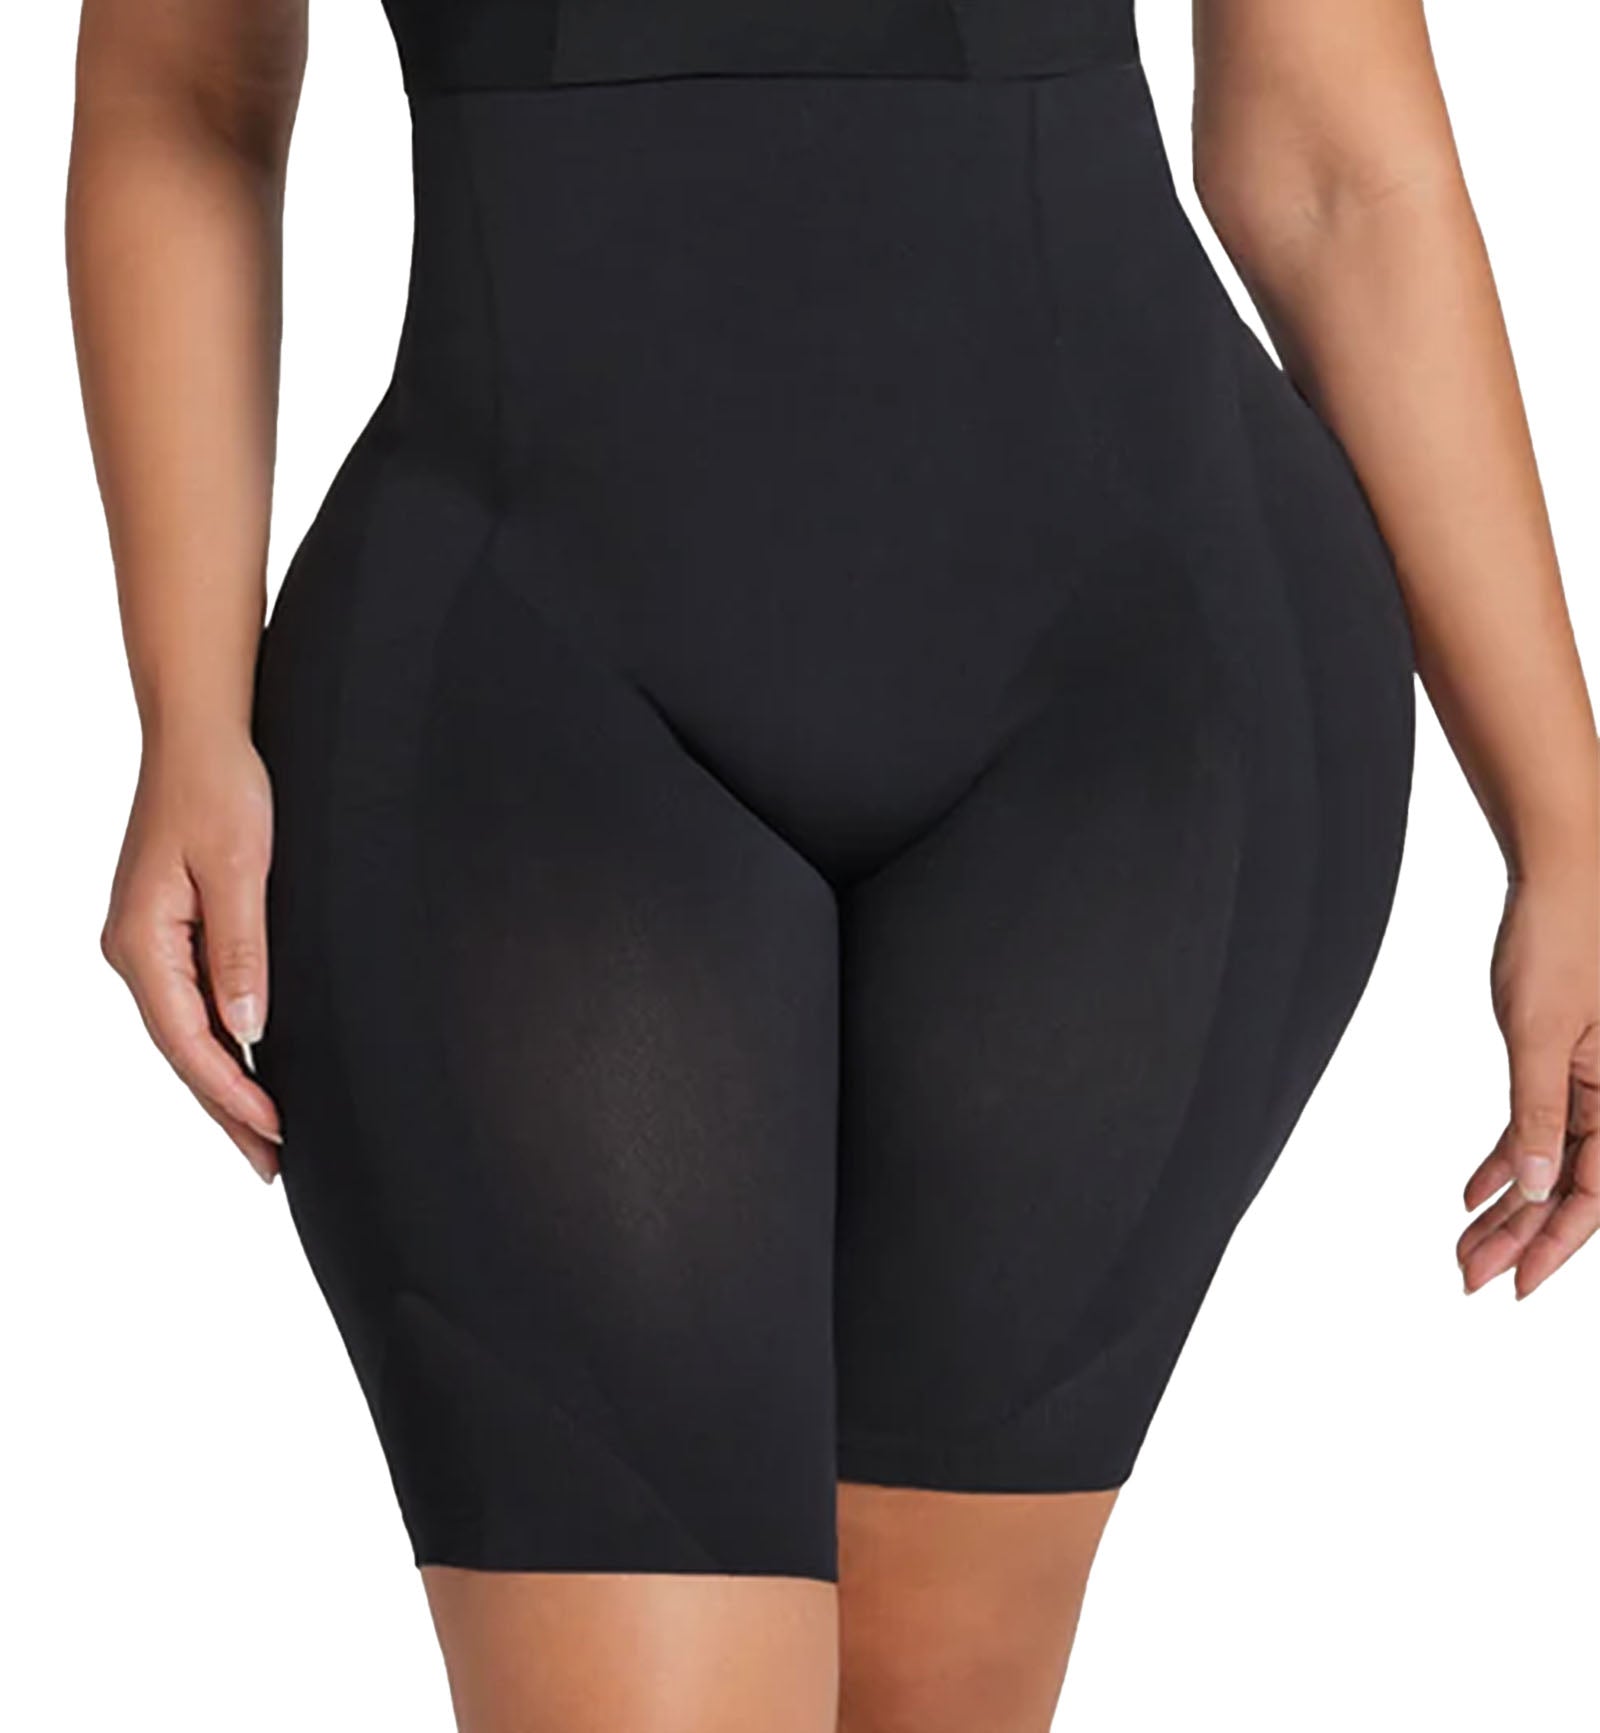 Leonisa Invisible Extra High-Waisted Shaper Short (012807M),XS/S,Black - Black,XS/S